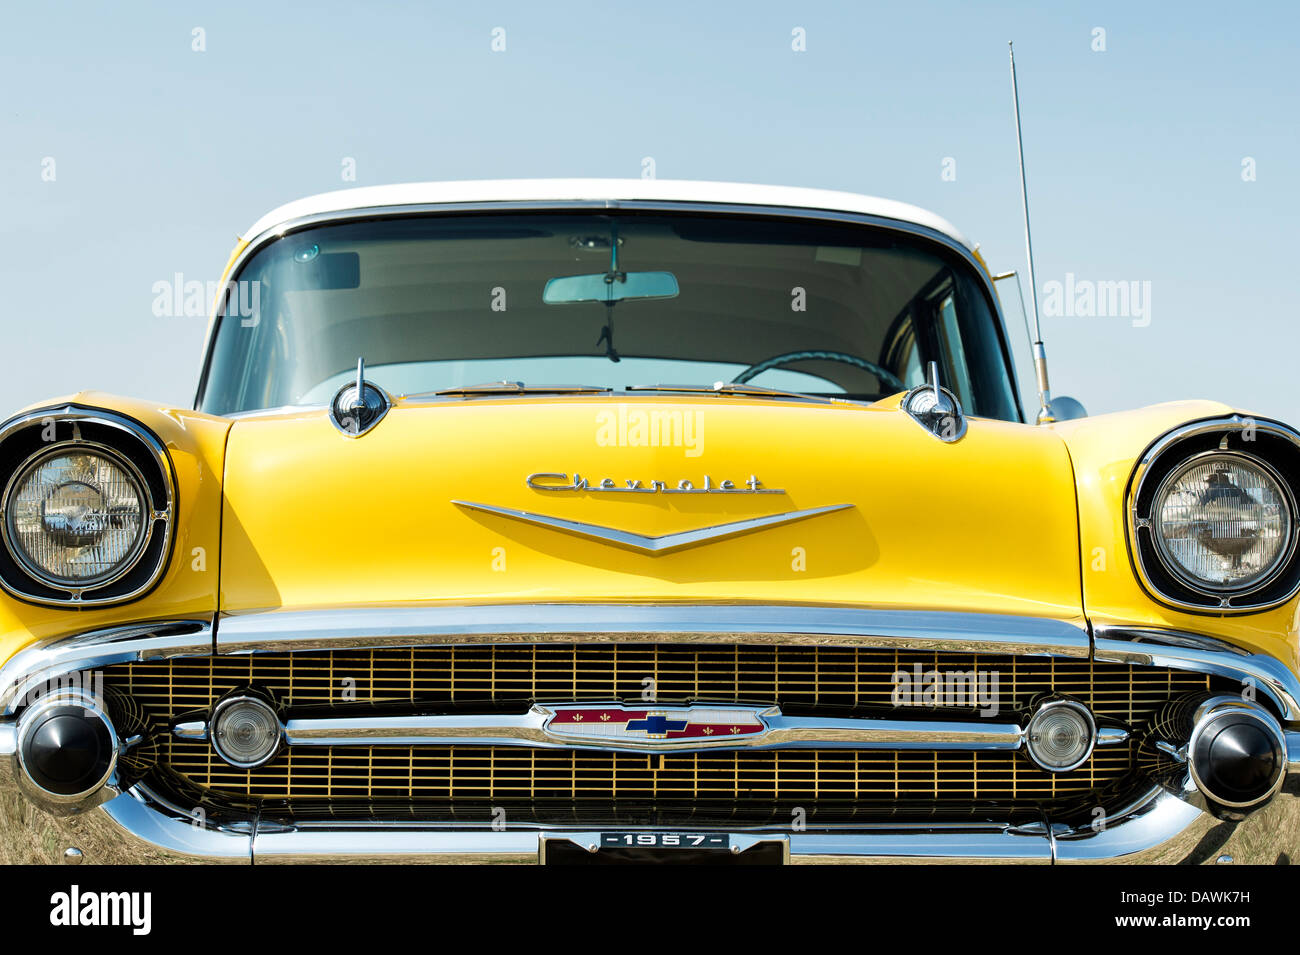 1957, Chevrolet Bel Air. Chevy. Classic American car Banque D'Images